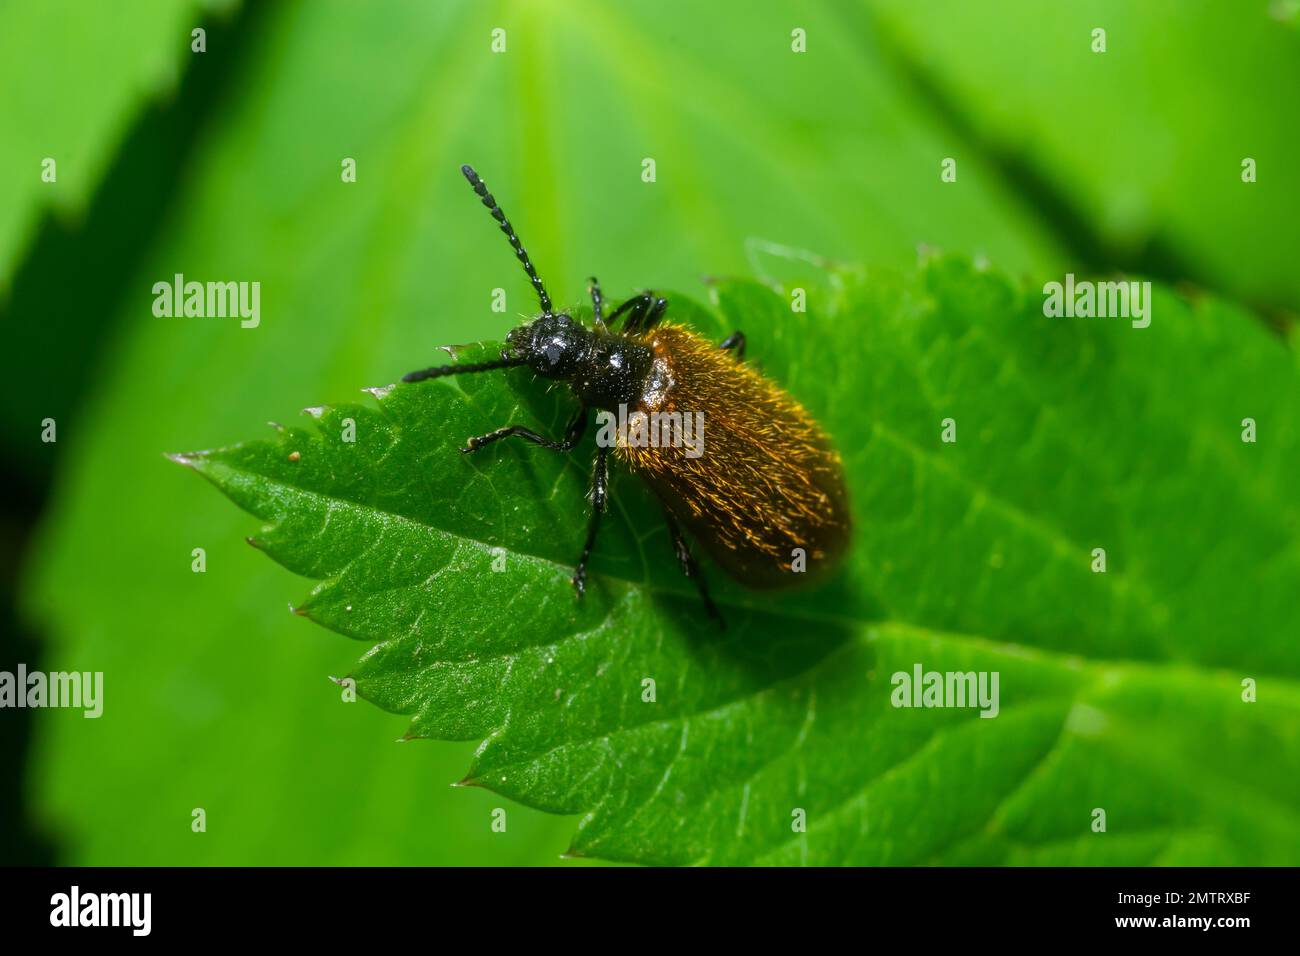 Lagria hirta beetle. A hairy beetle in the family Tenebrionidae, said to feed on Asteraceae and Apiaceae plants. Stock Photo